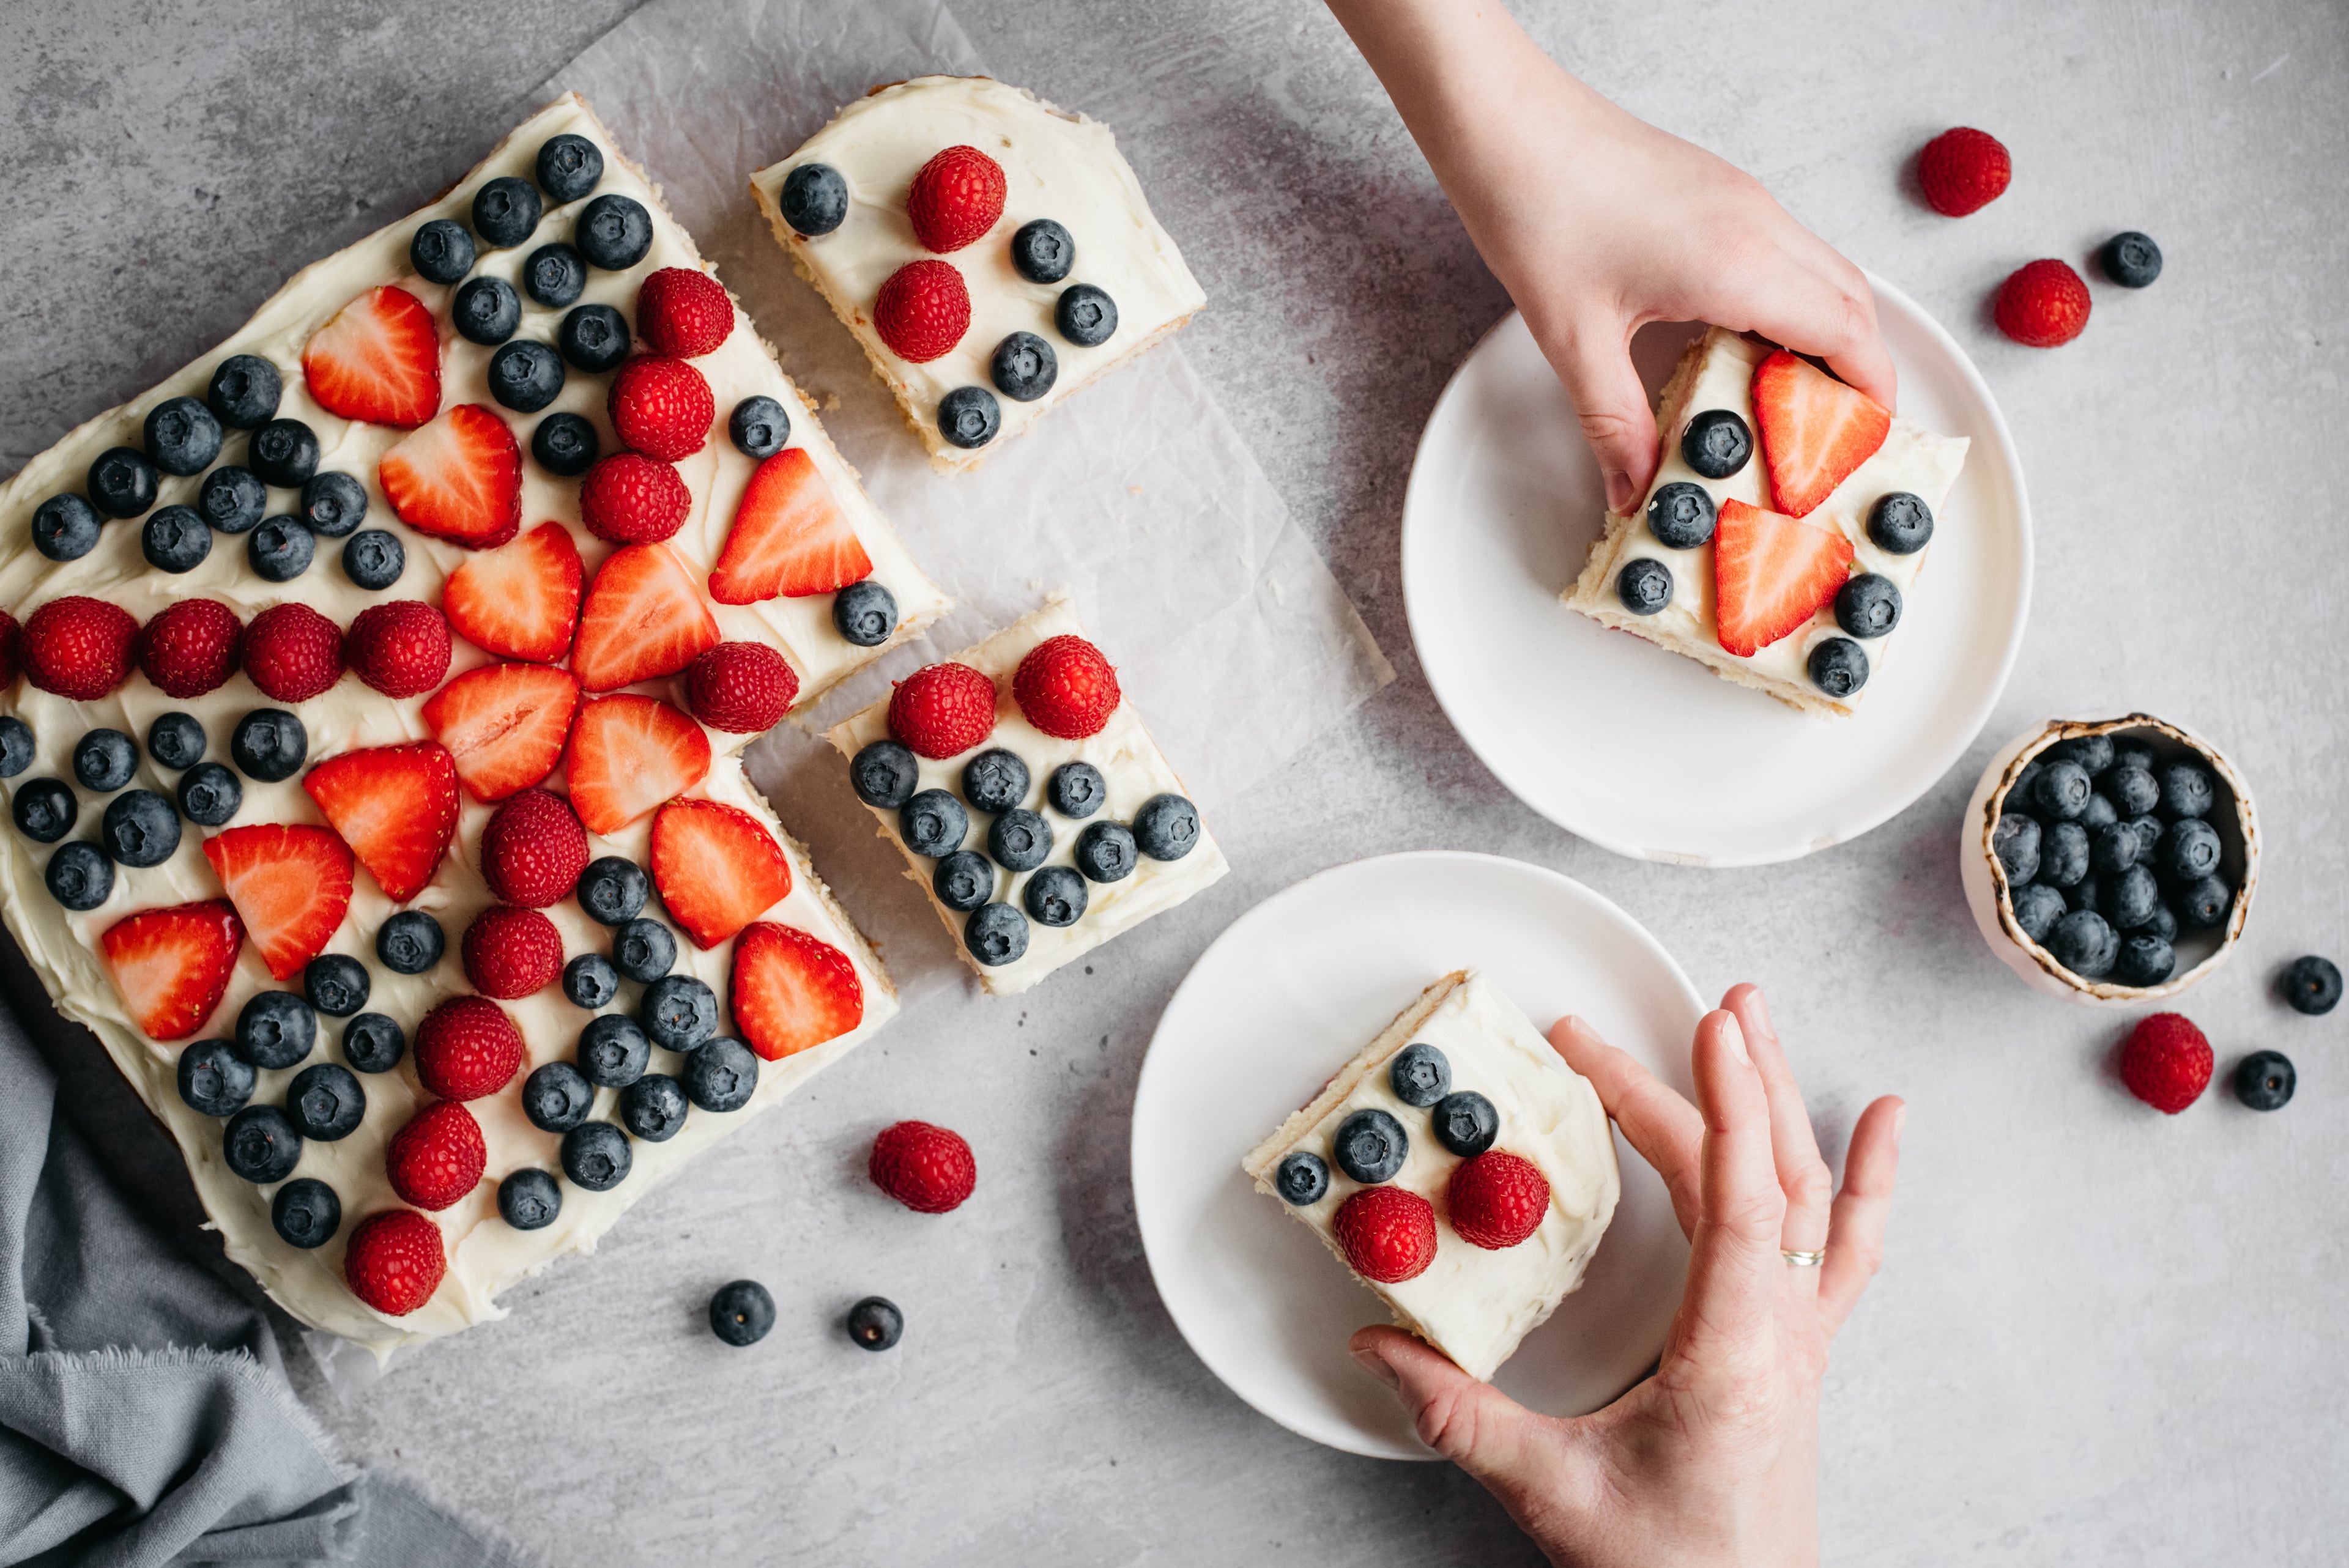 Top view of Union Jack Traybake with sliced served on plates, and hands reaching for a piece of cake topped with fresh berries for the Jubilee